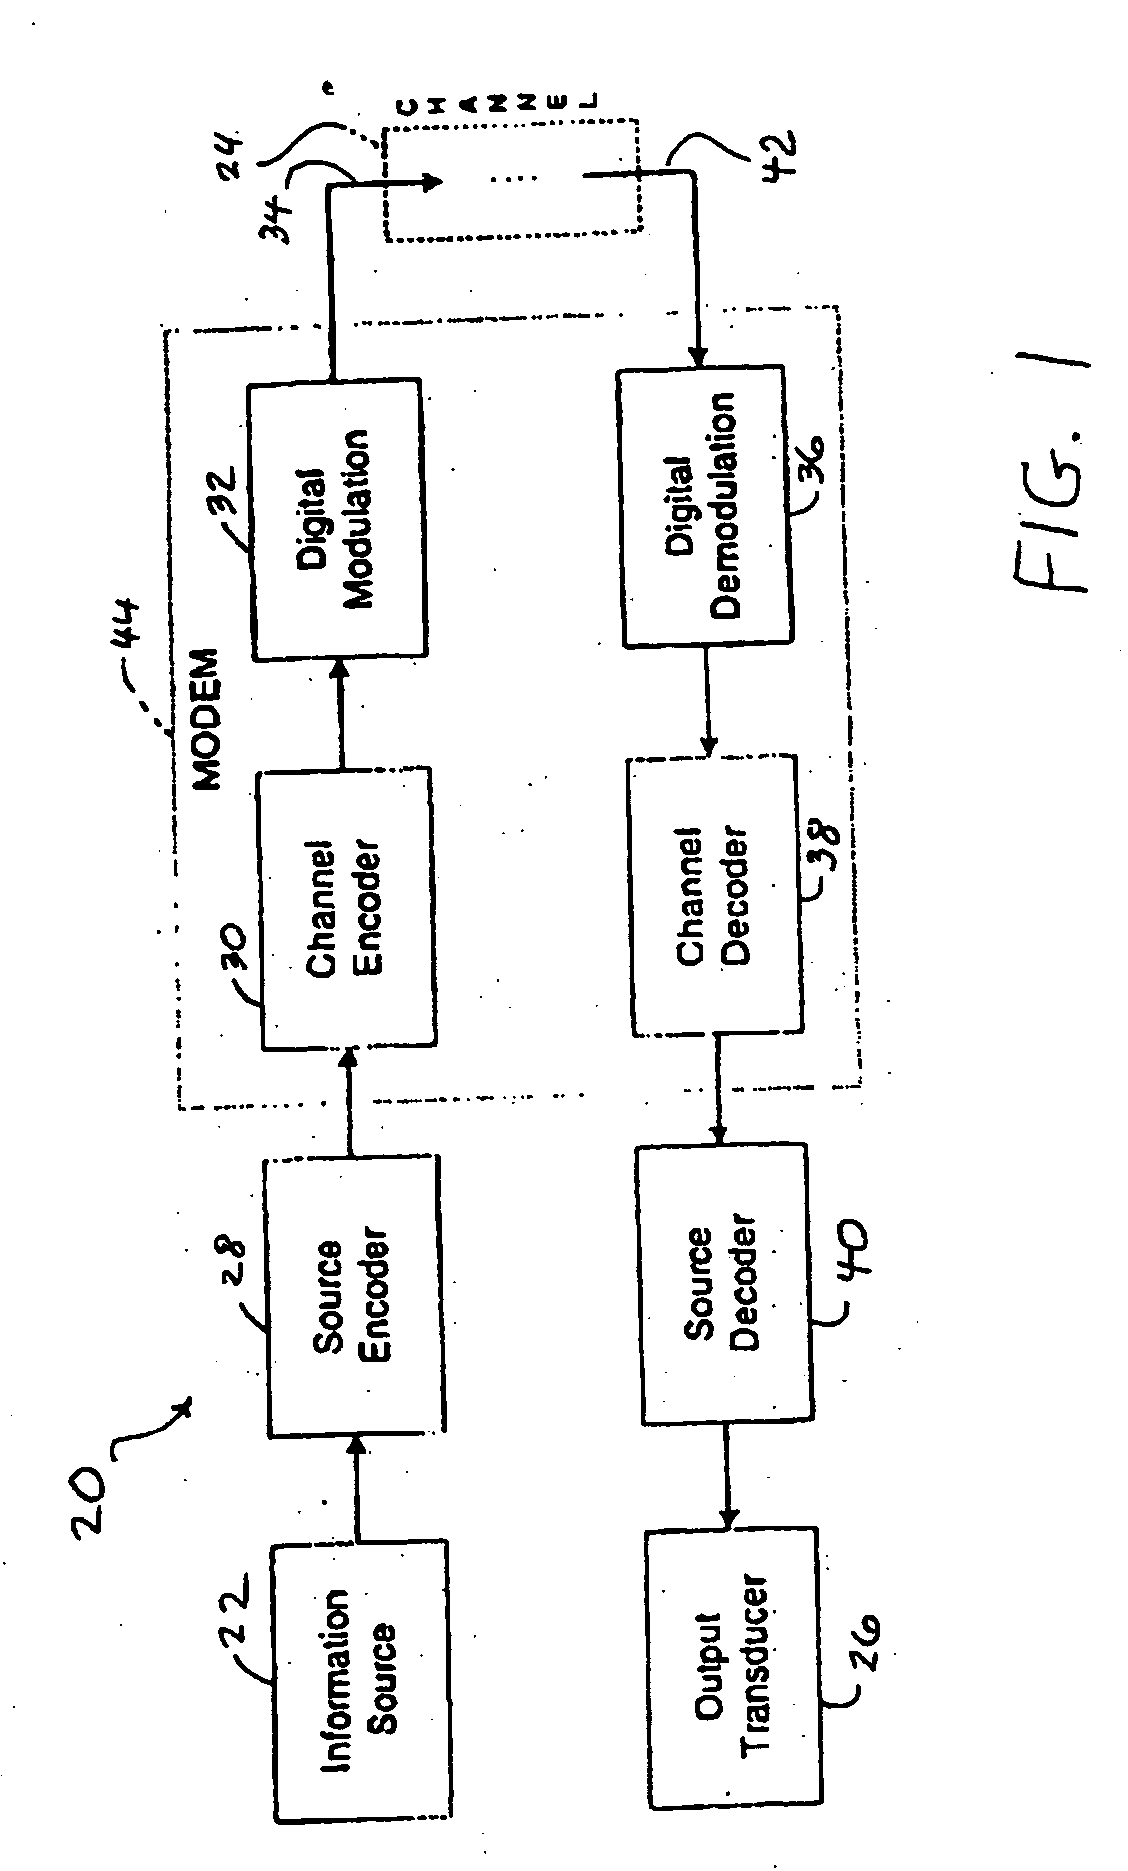 Parallel filter realization for wideband programmable digital radios